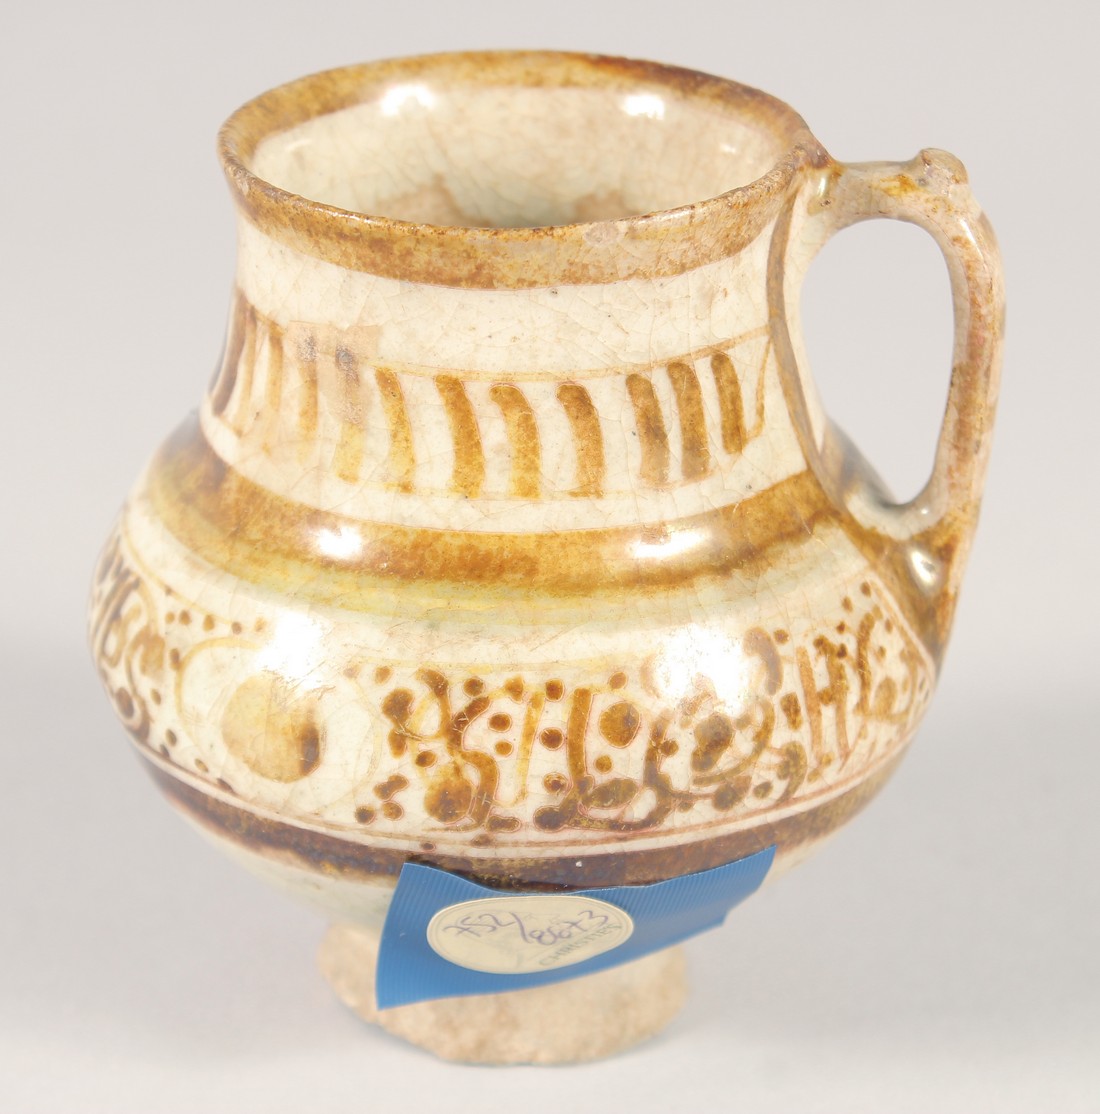 A SMALL KASHAN LUSTRE GLAZE POTTERY EWER, with provenance sticker; Christie's, 9cm high. - Image 3 of 7